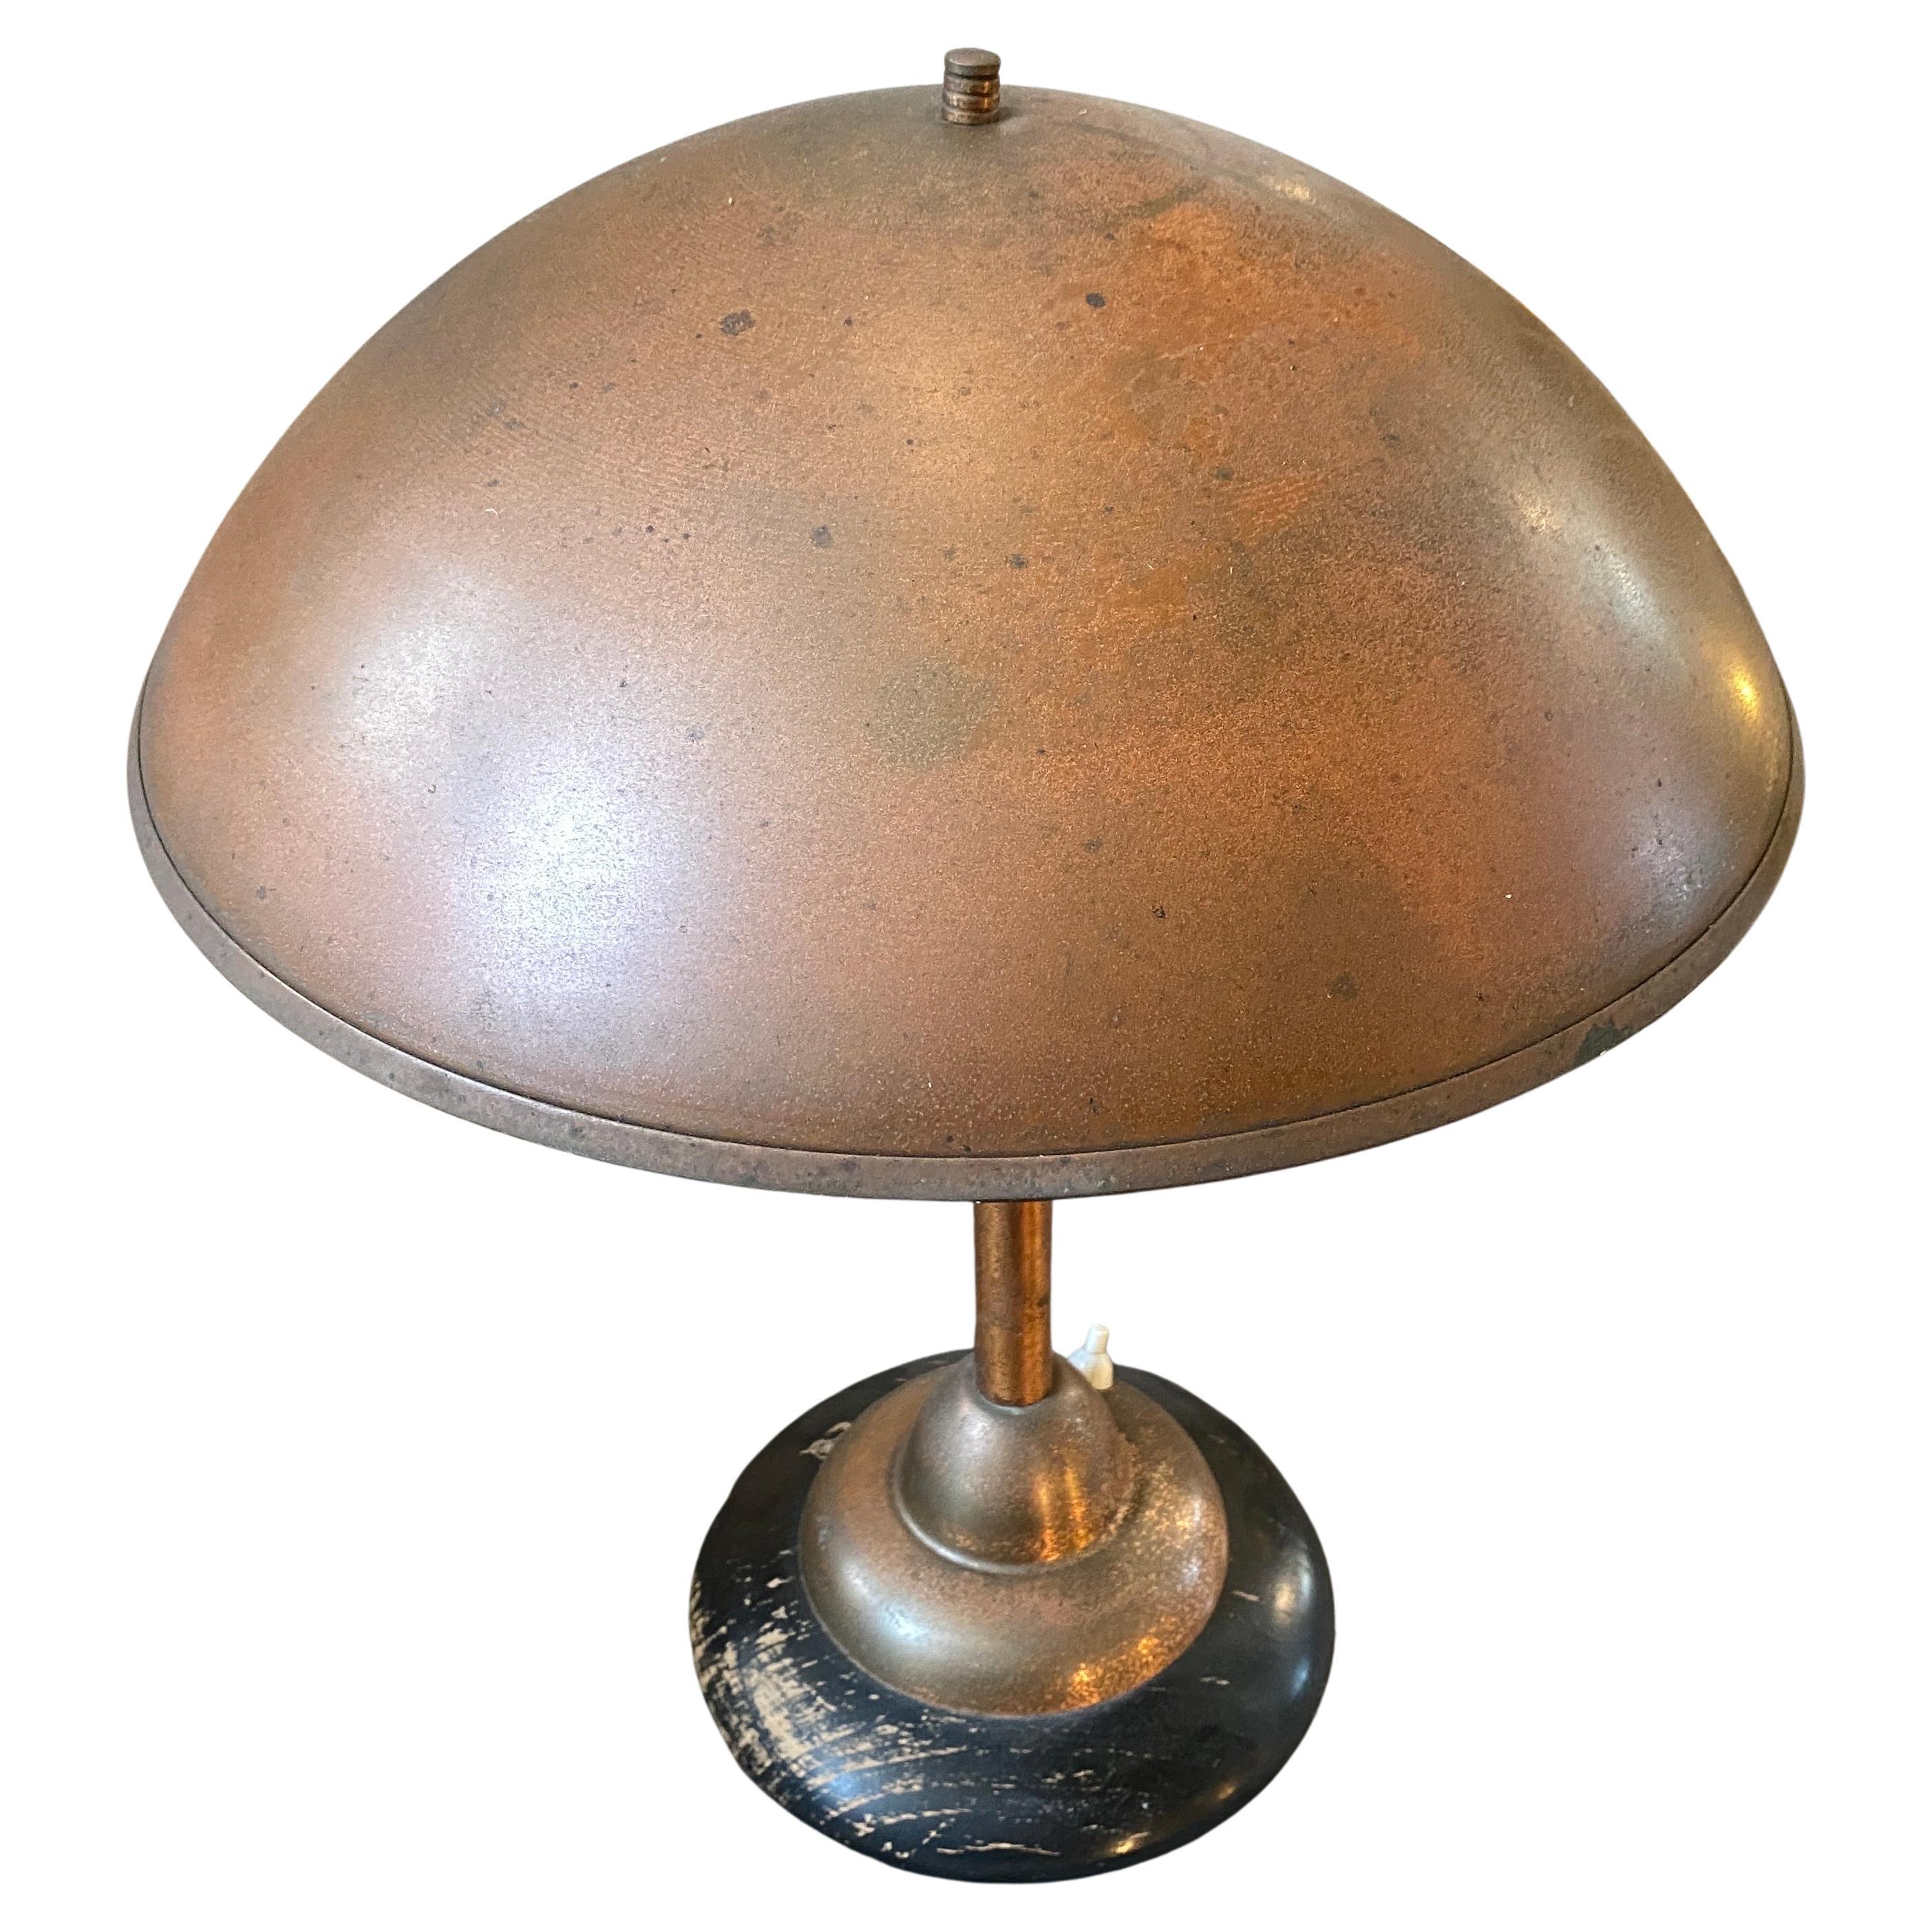 An industrial copper and wood table lamp designed and manufactured in Italy in the Fifties. Copper it's in original patina, black painted wood has signs of use and age that's gives it a superb vintage look. It works both 110-240 volts and needs a